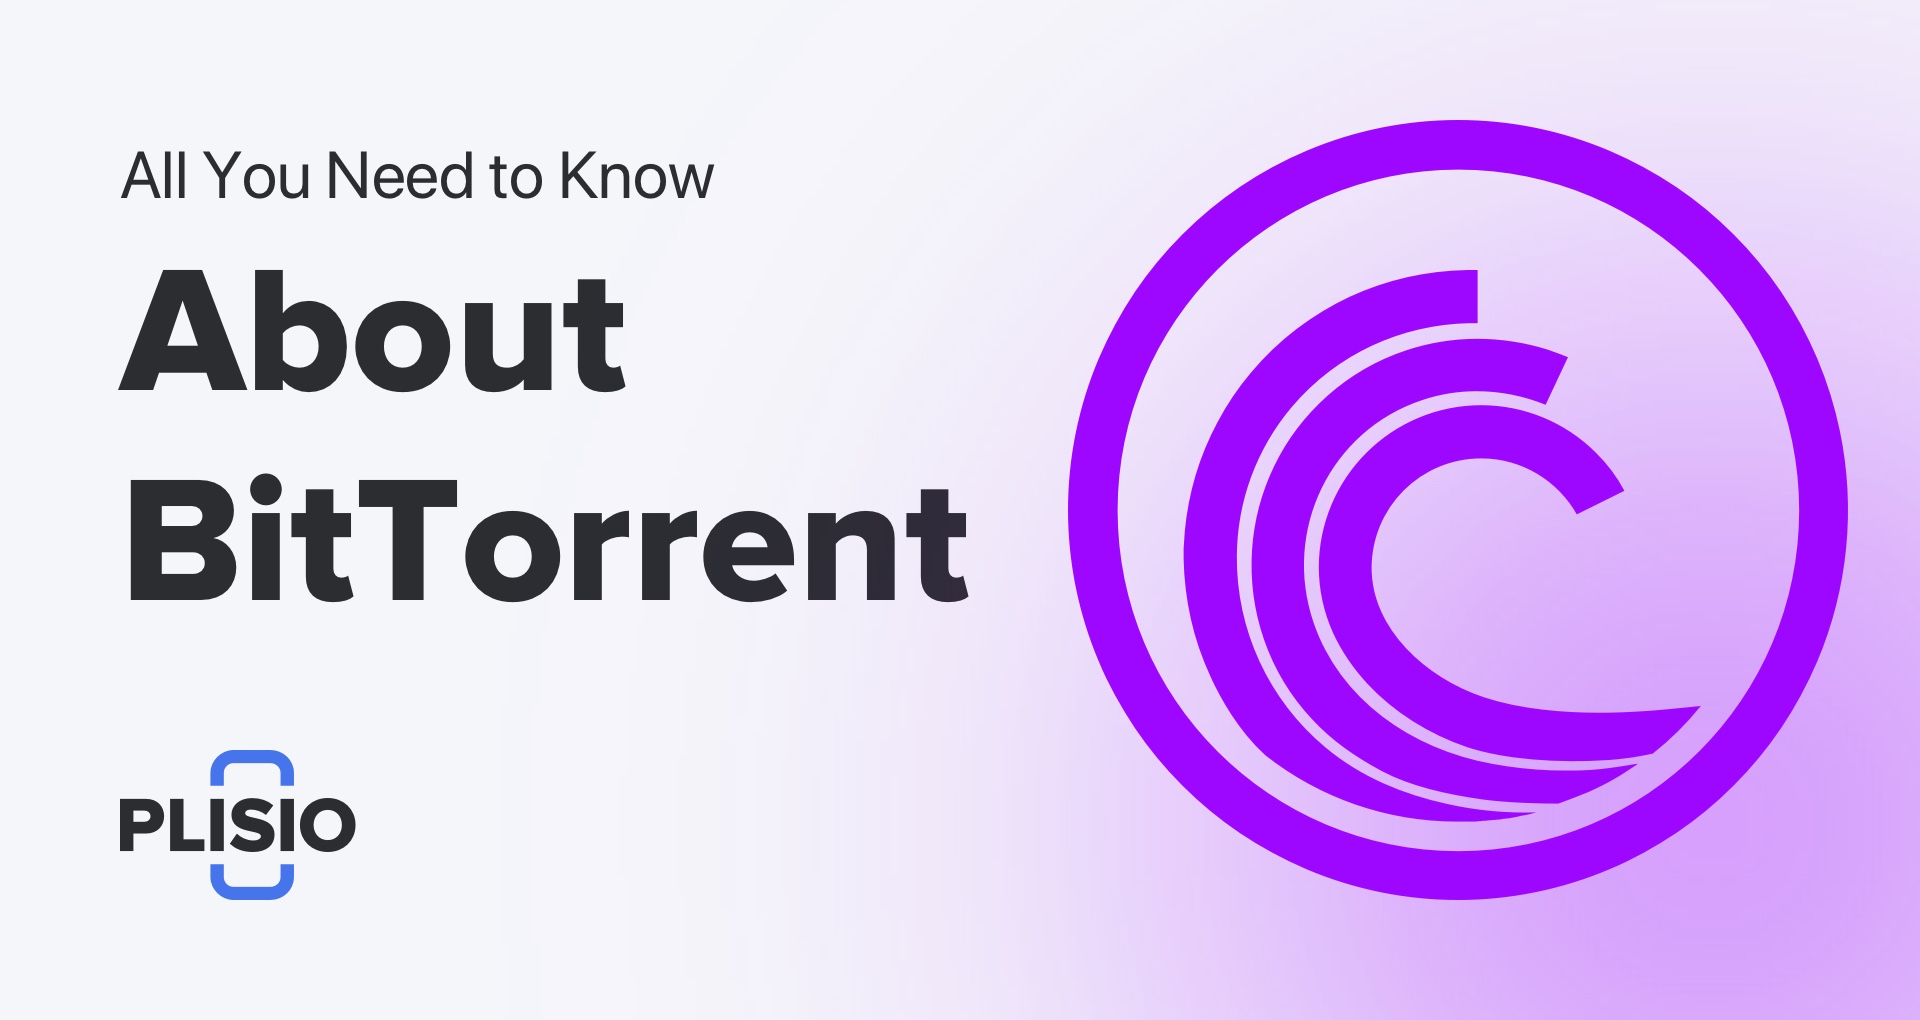 Everything You Need to Know About BitTorrent and How to Accept It